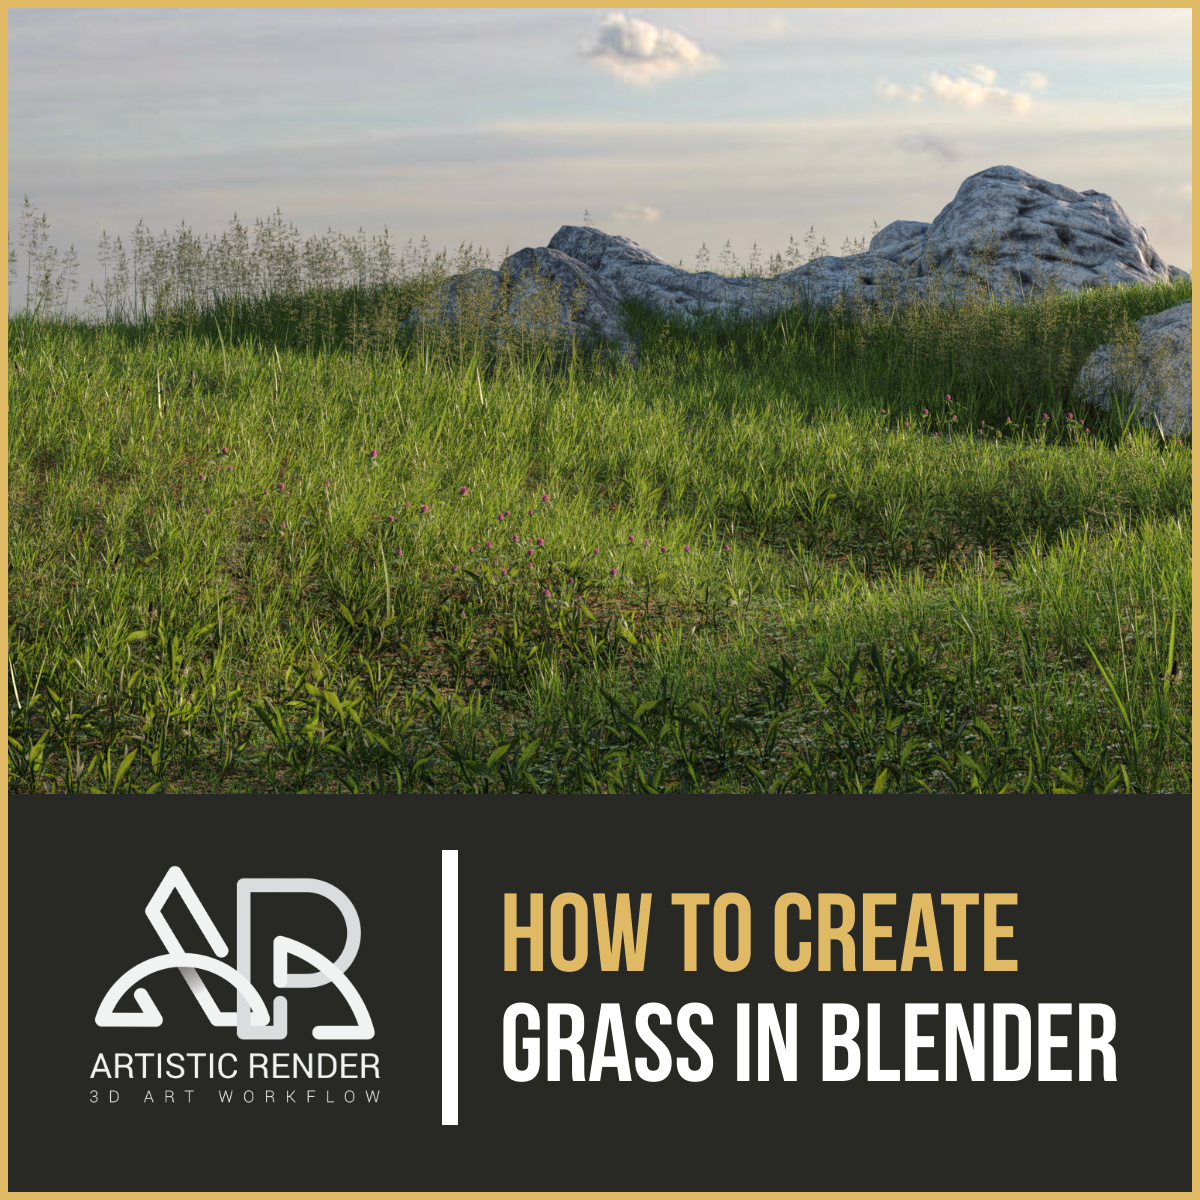 poor activity Frustrating How to create grass in Blender: The ultimate guide - Artisticrender.com